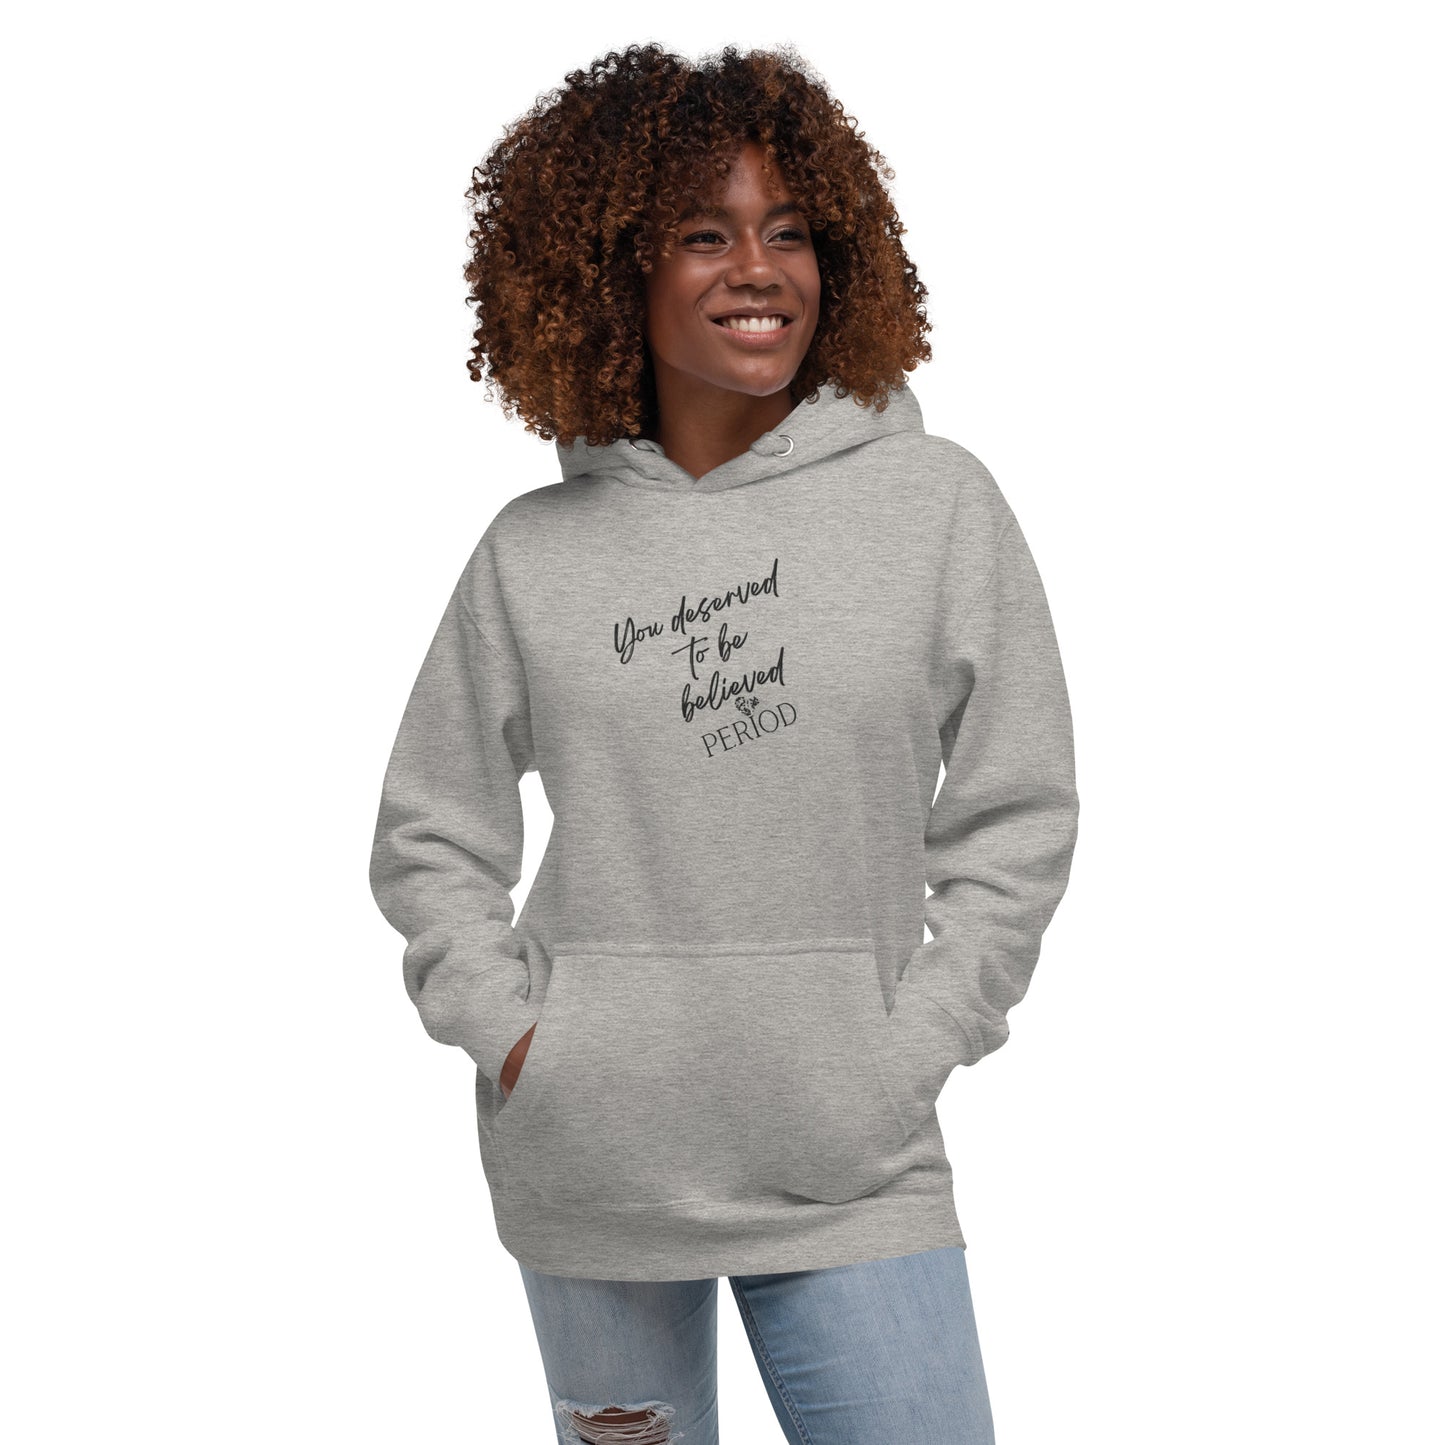 You Deserved To Be Believed Period Hoodie